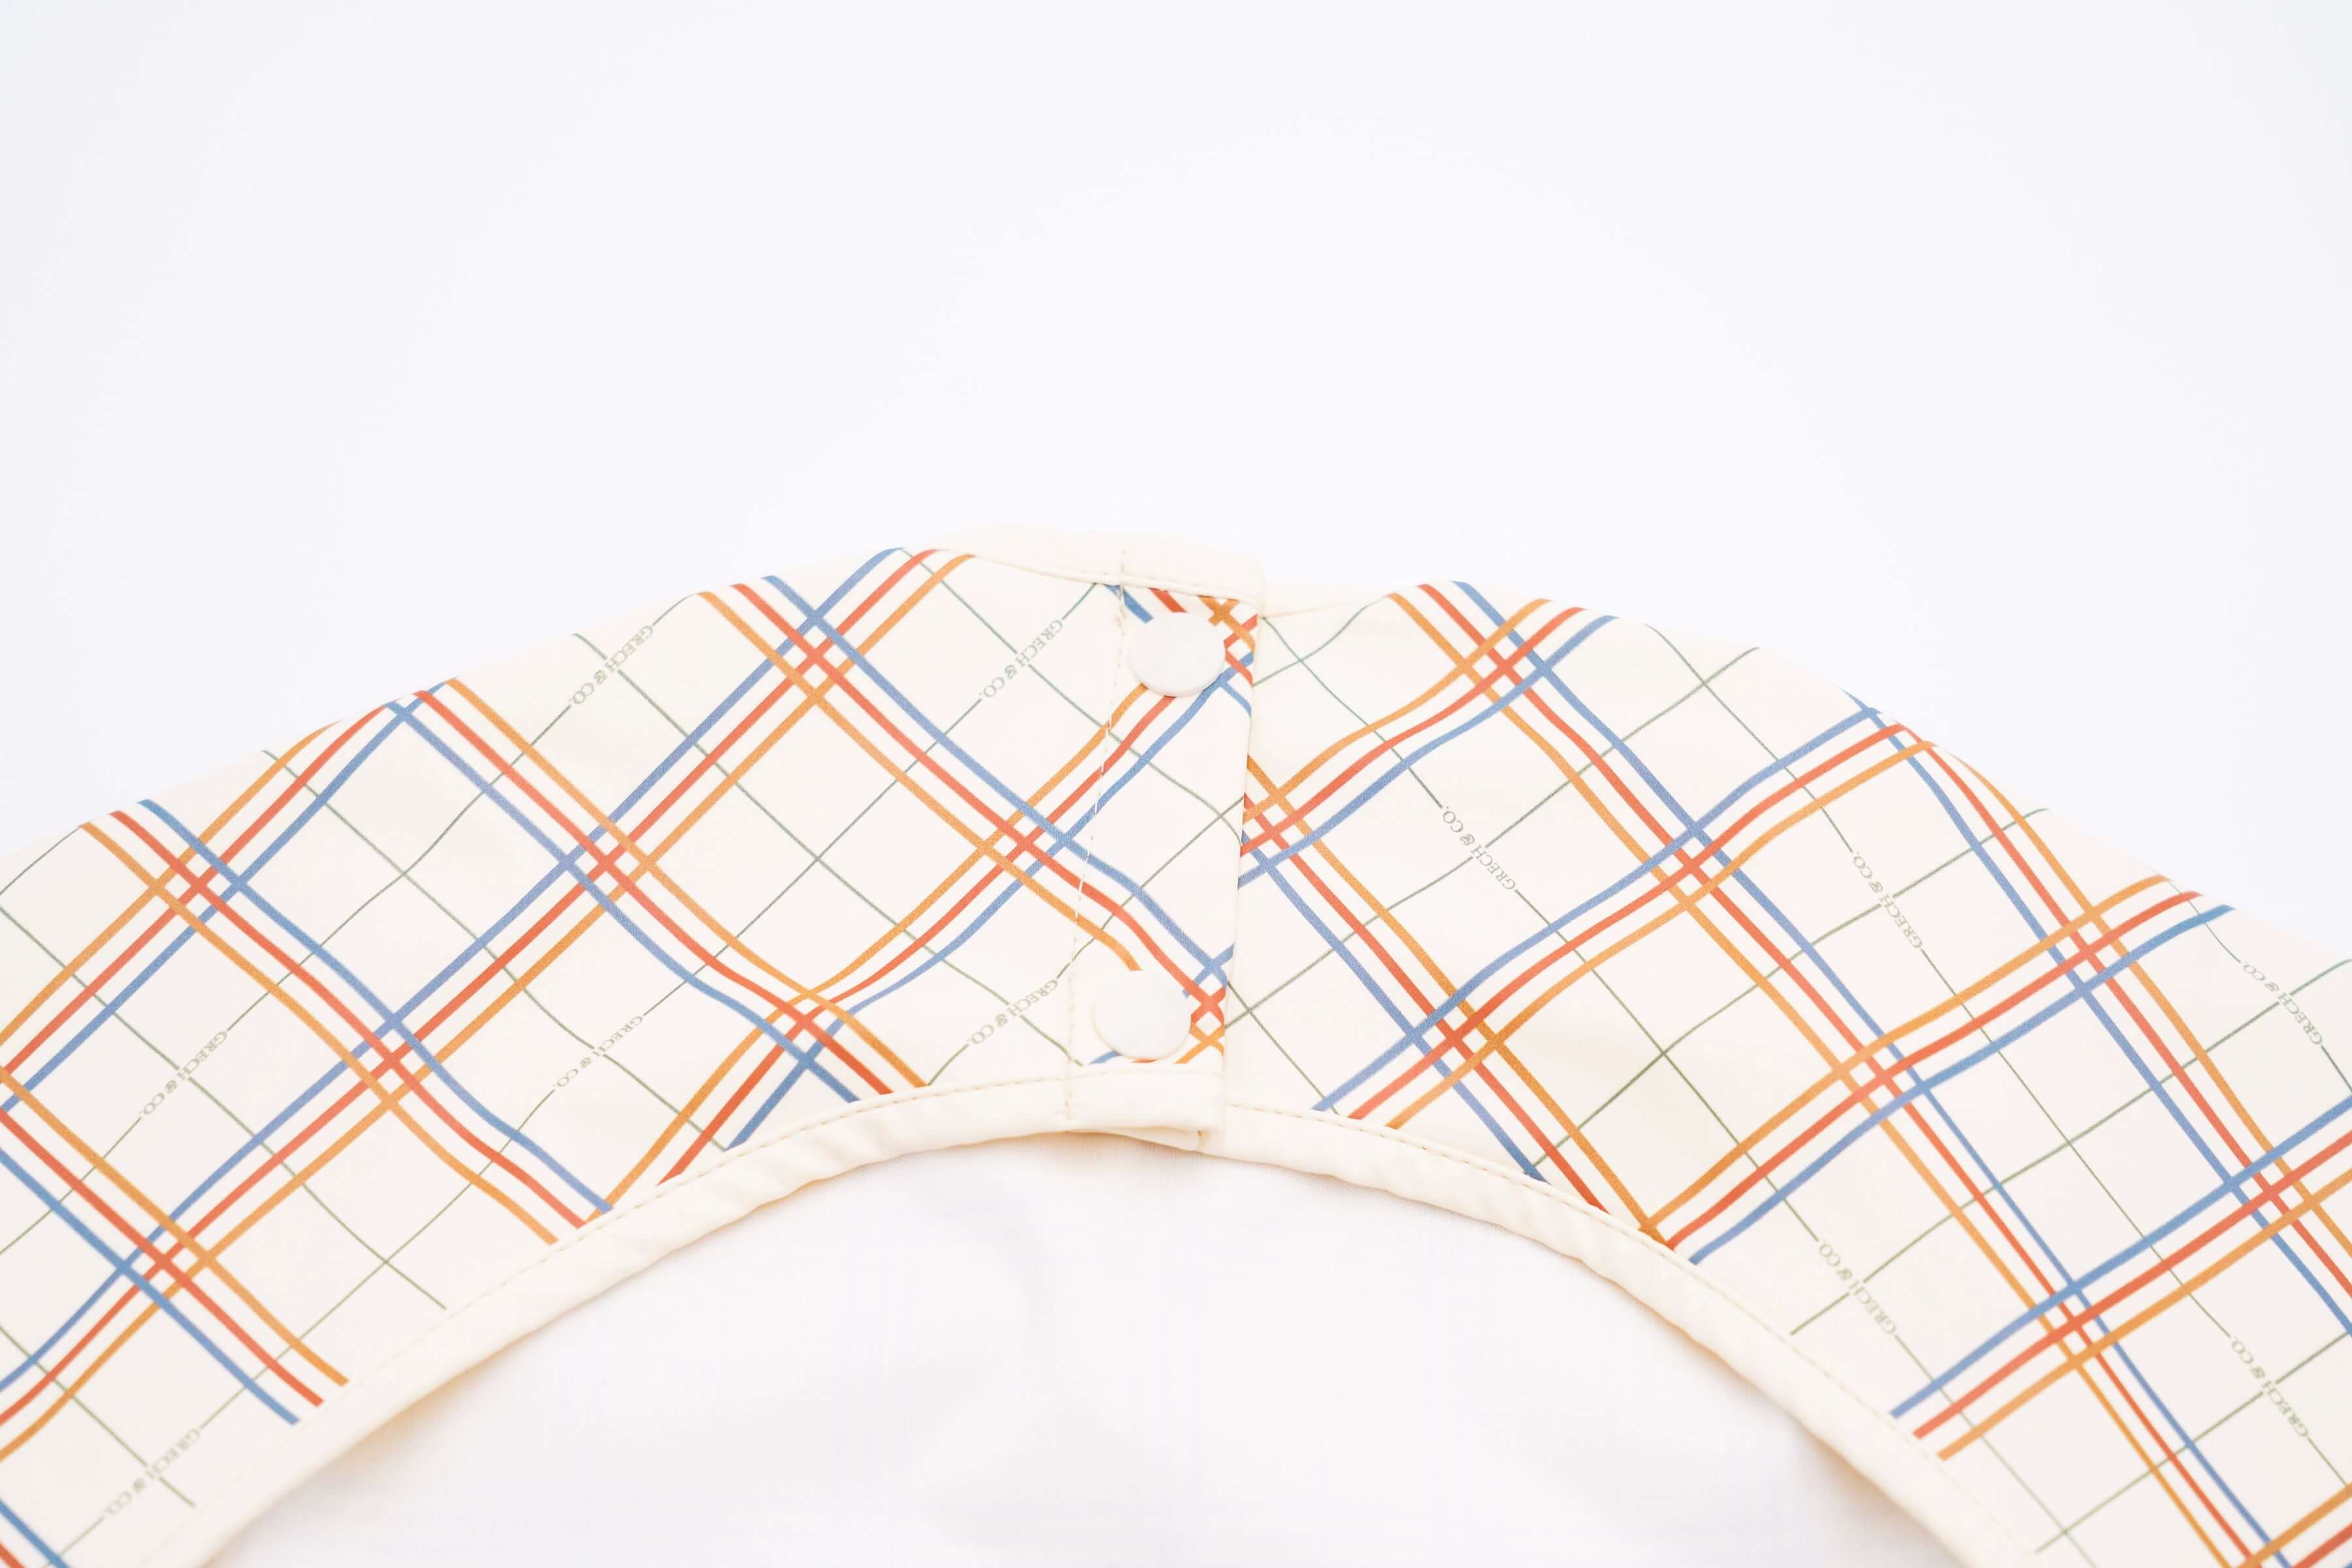 Baby bib online in Hong Kong and Singapore from eco-friendly and sustainable materials. Keep mealtimes cleaner and fun for all with the Grech & Co. easy-to-clean and store plaid baby bib, water-resistant recycled Oeko tex material. Stylish and practical baby and kids' bib for everyday use and best bib for travelling.